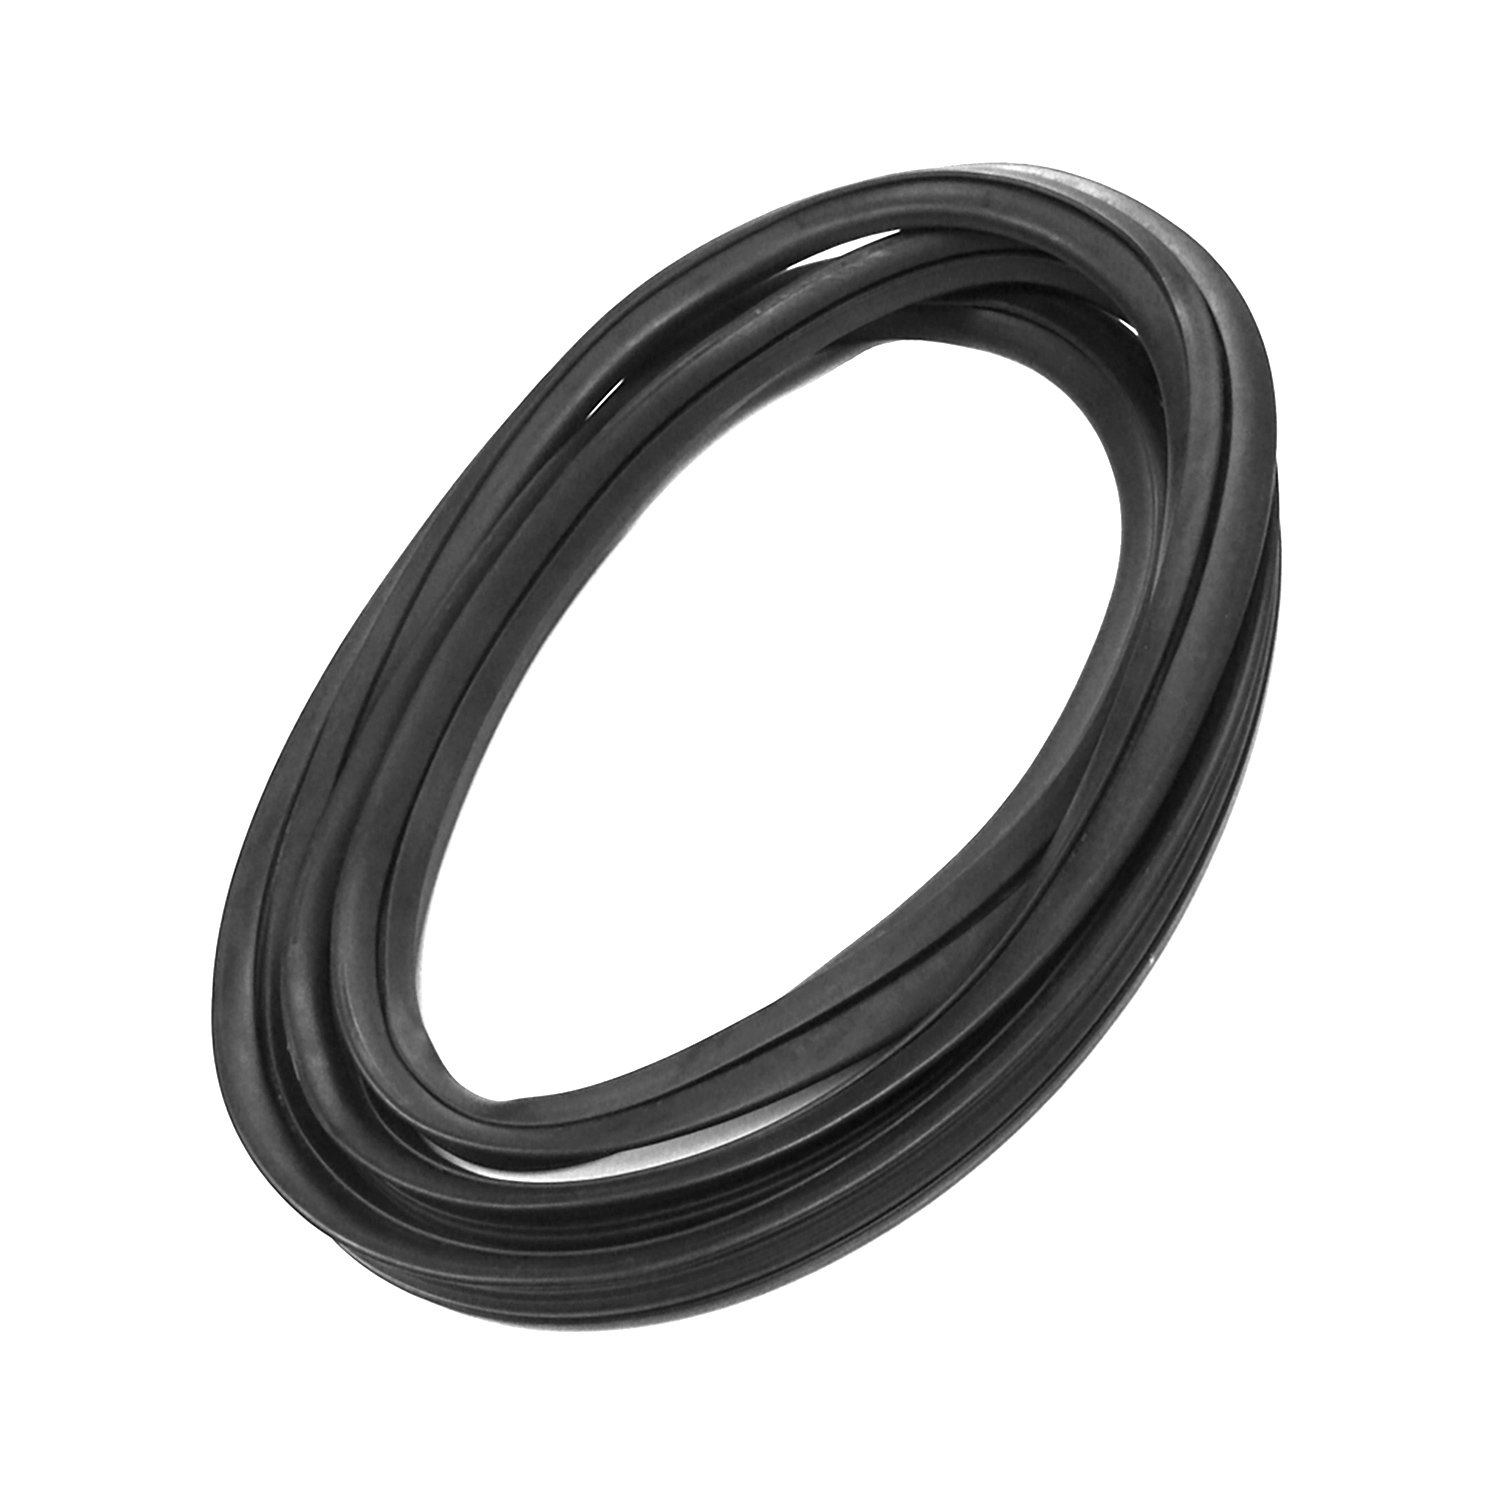 1976 GMC G25 Windshield Seal, 71-80 GM Full Size Van With Trim Groove, Each-VWS 7324-A